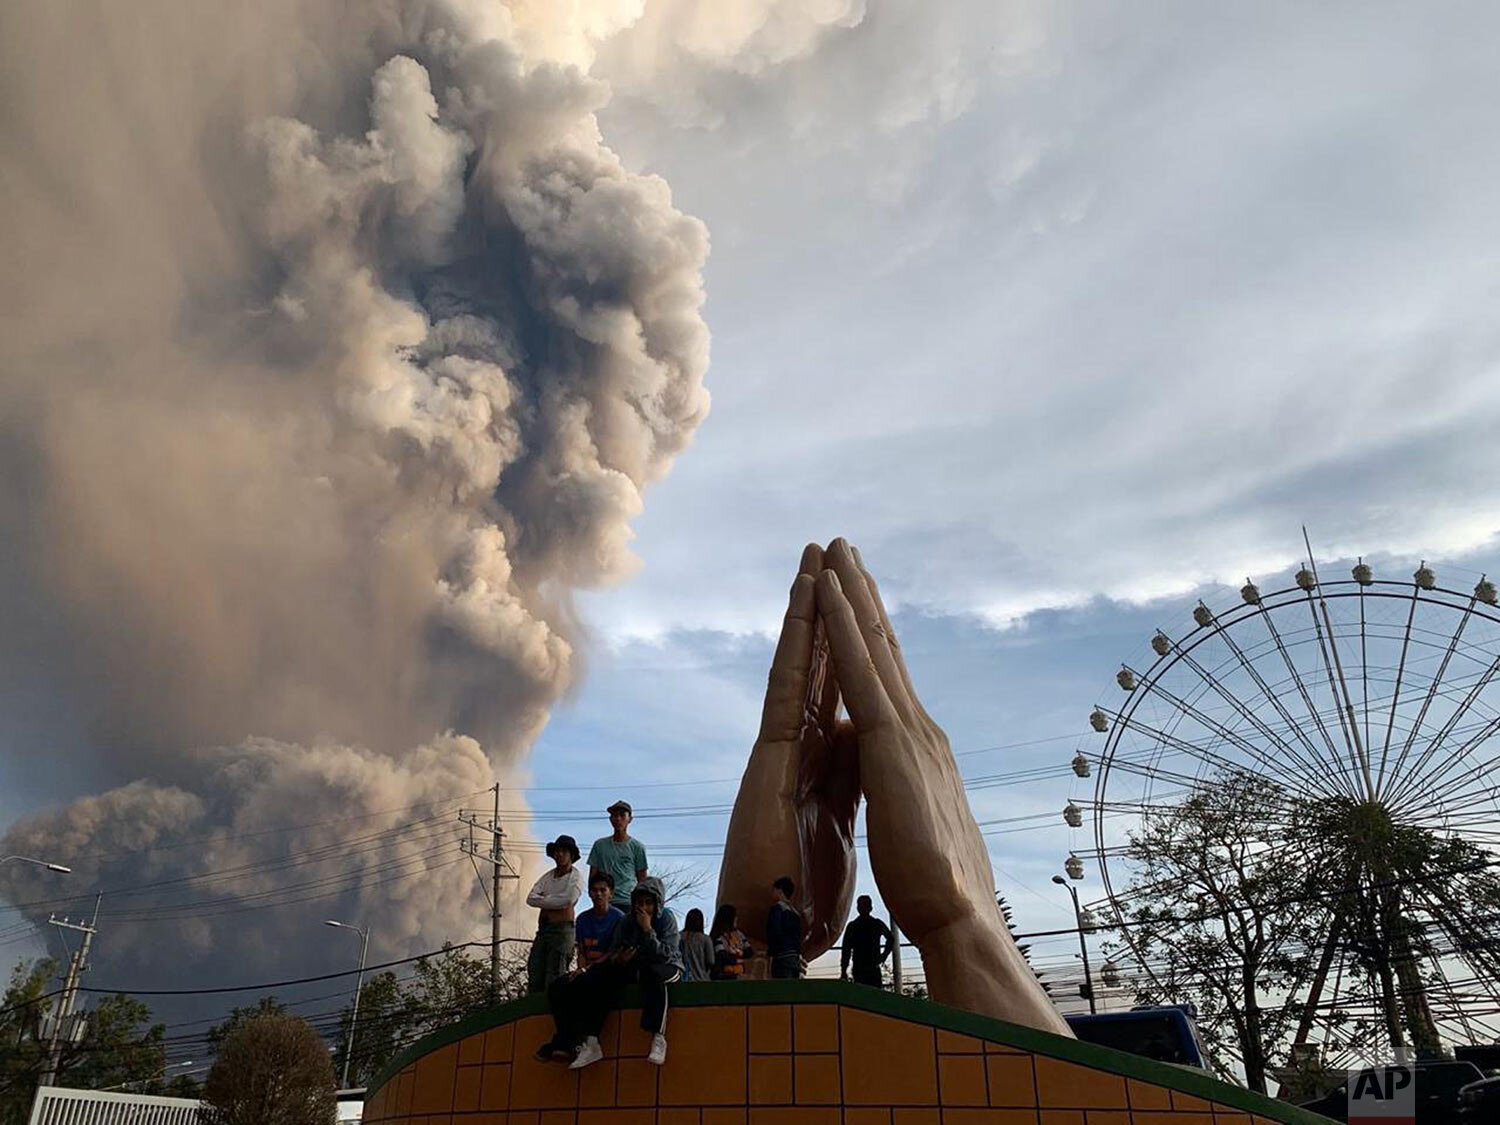  People watch as the Taal volcano spews ash and smoke during an eruption in Tagaytay, Cavite province south of Manila, Philippines, Sunday, Jan. 12, 2020. (AP Photo/Bullit Marquez) 